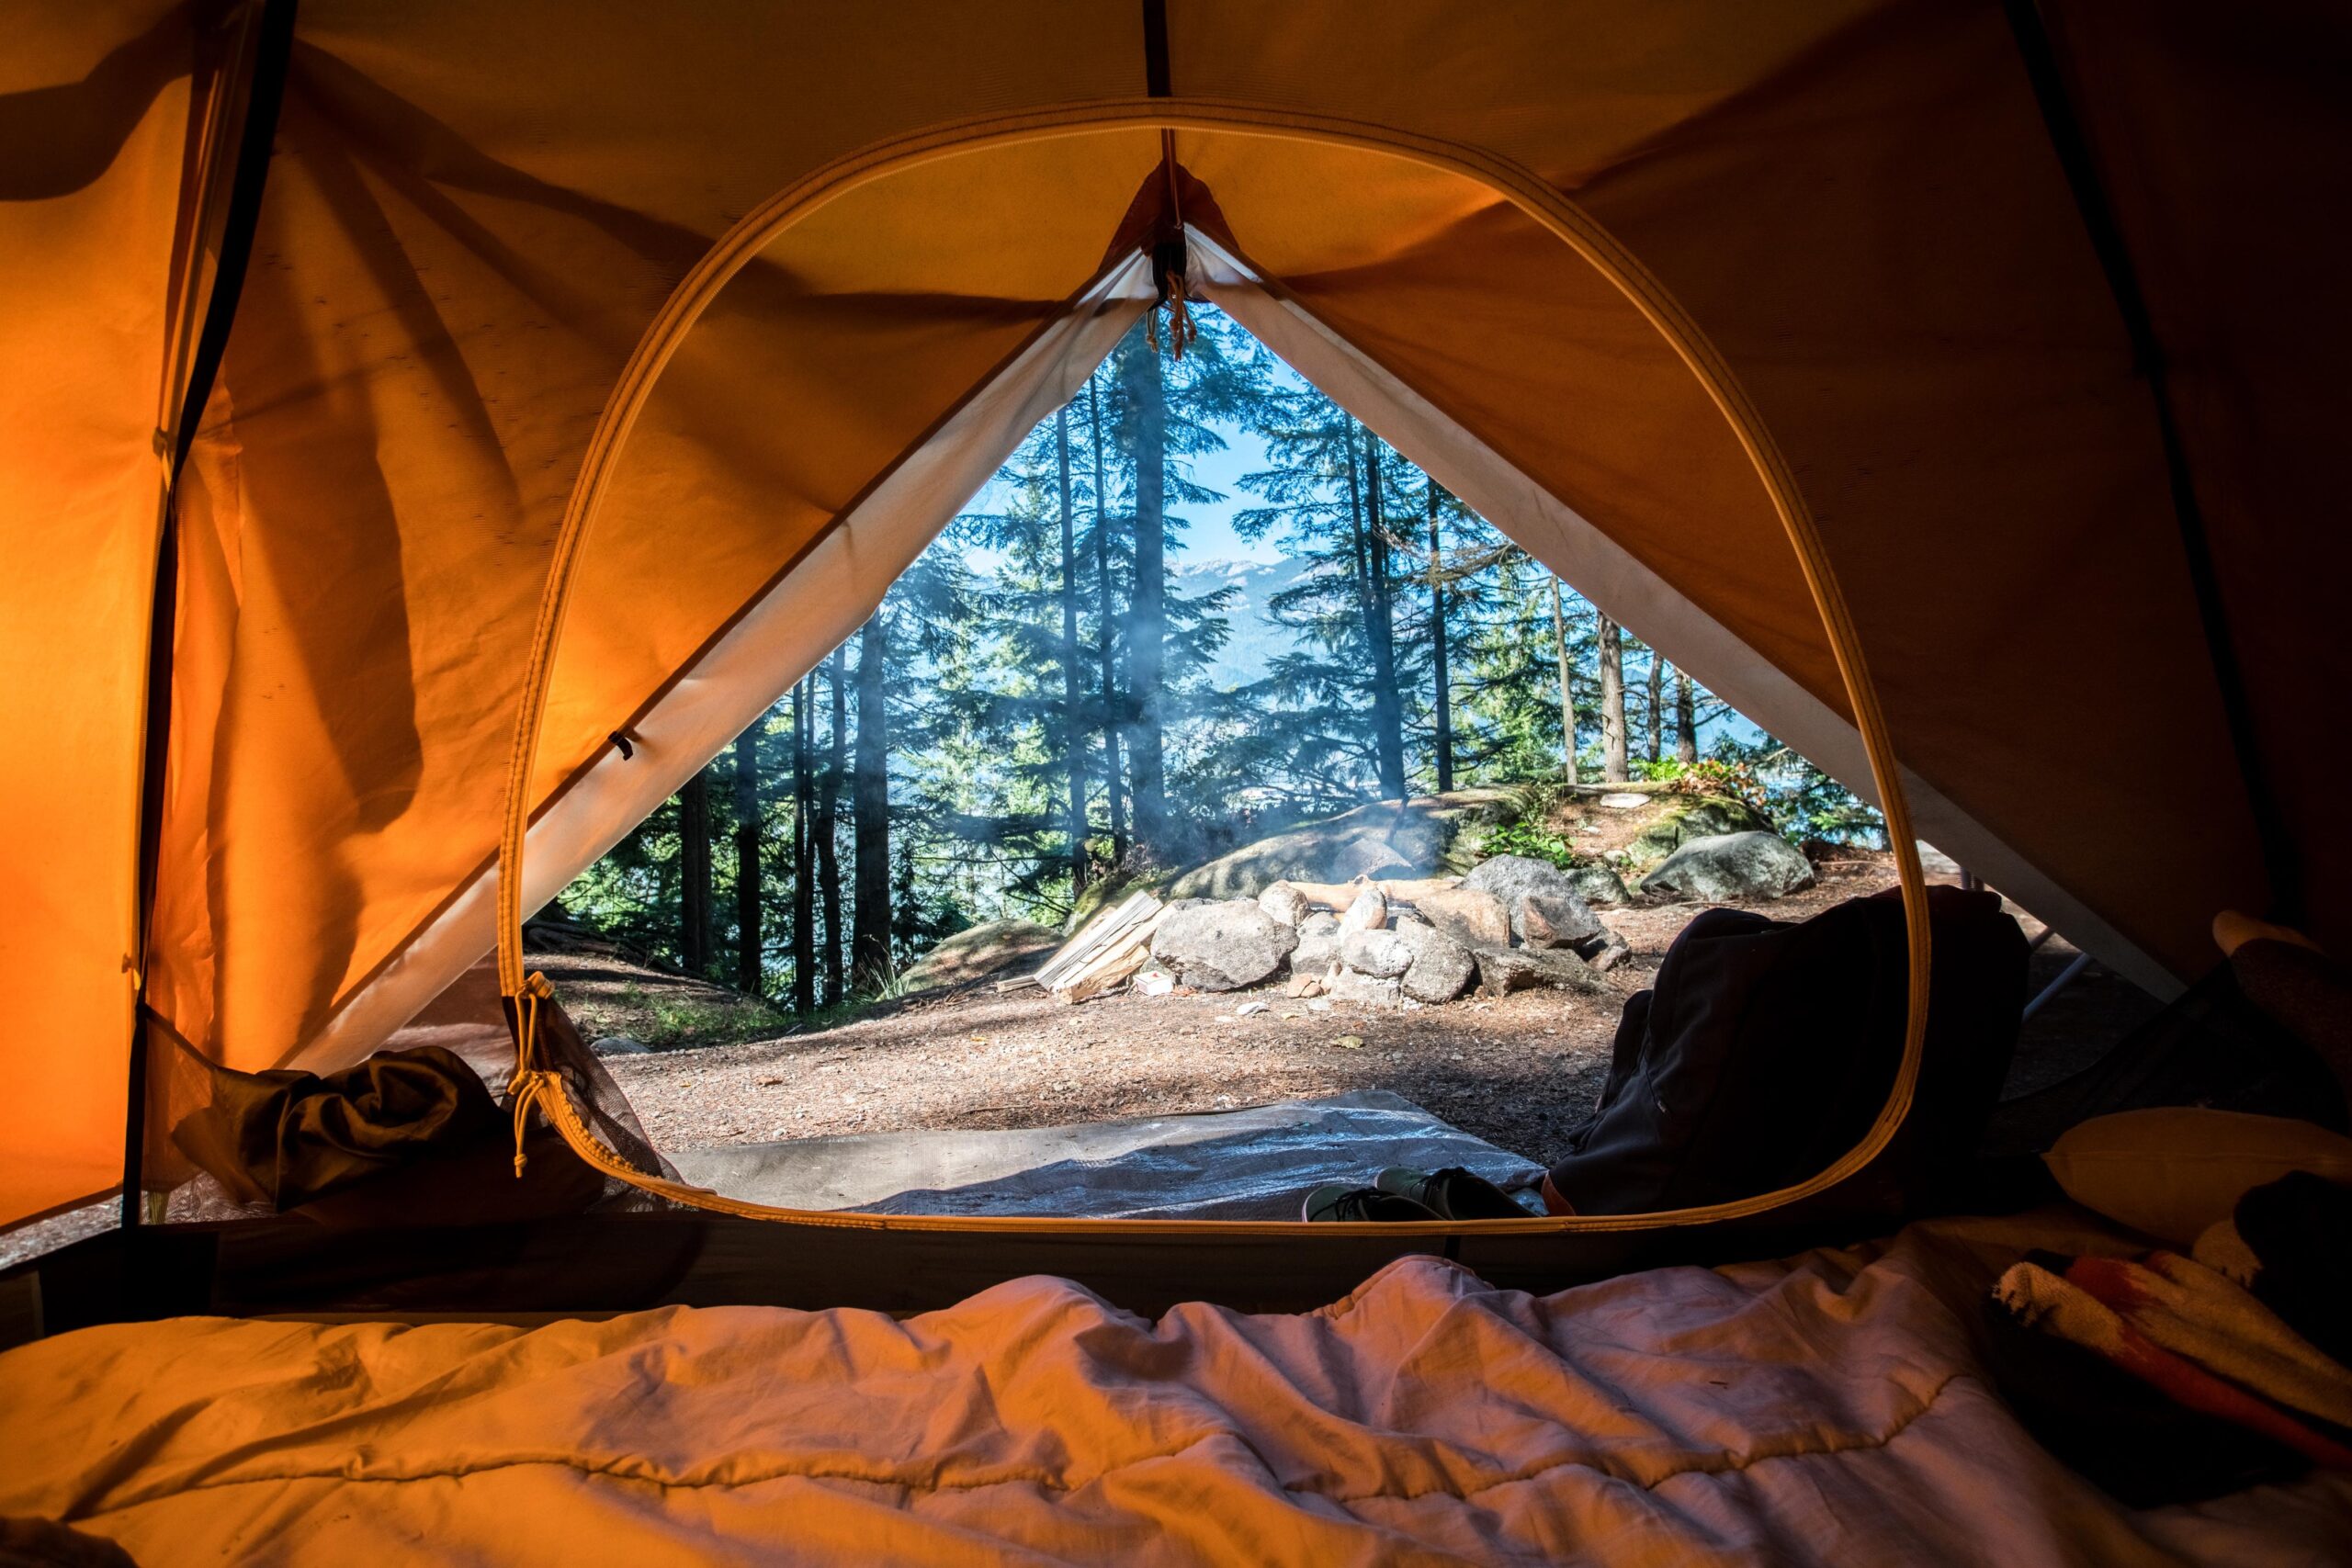 the view looking outside from the inside of a camping tent